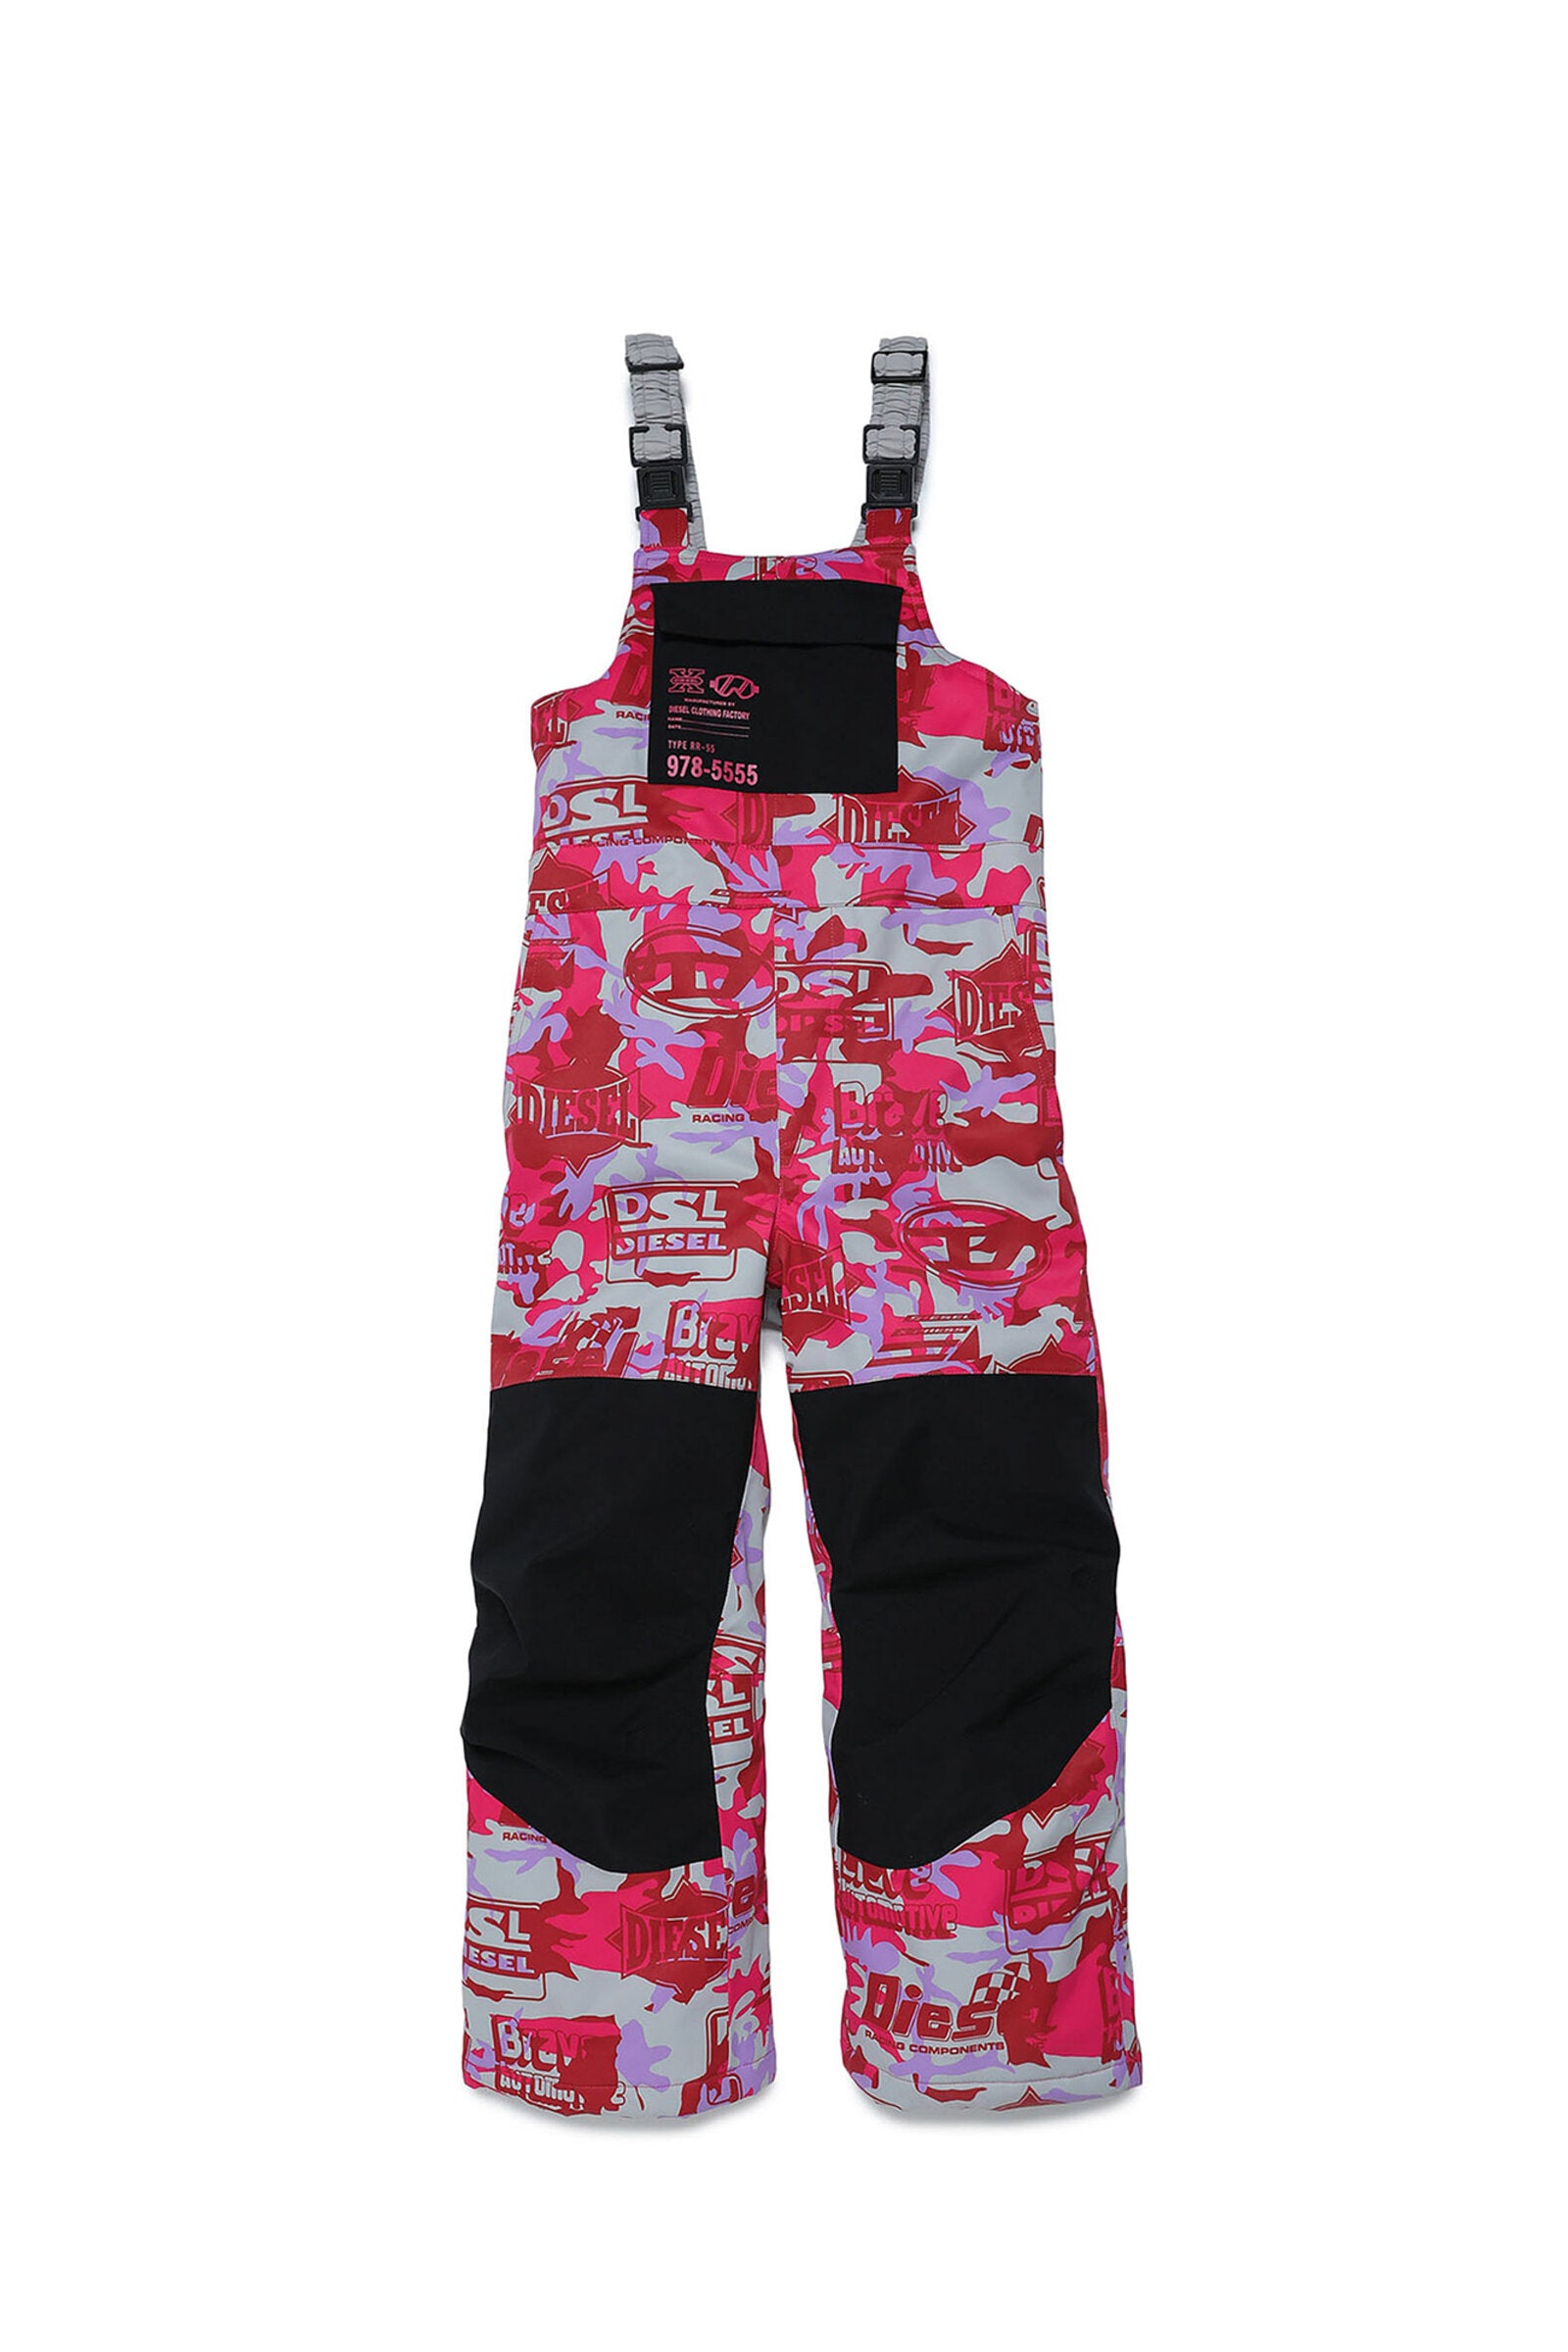 DIESEL SKI SALOPETTES IN PINK CAMOUFLAGE PRINT WITH ALLOVER LOGO